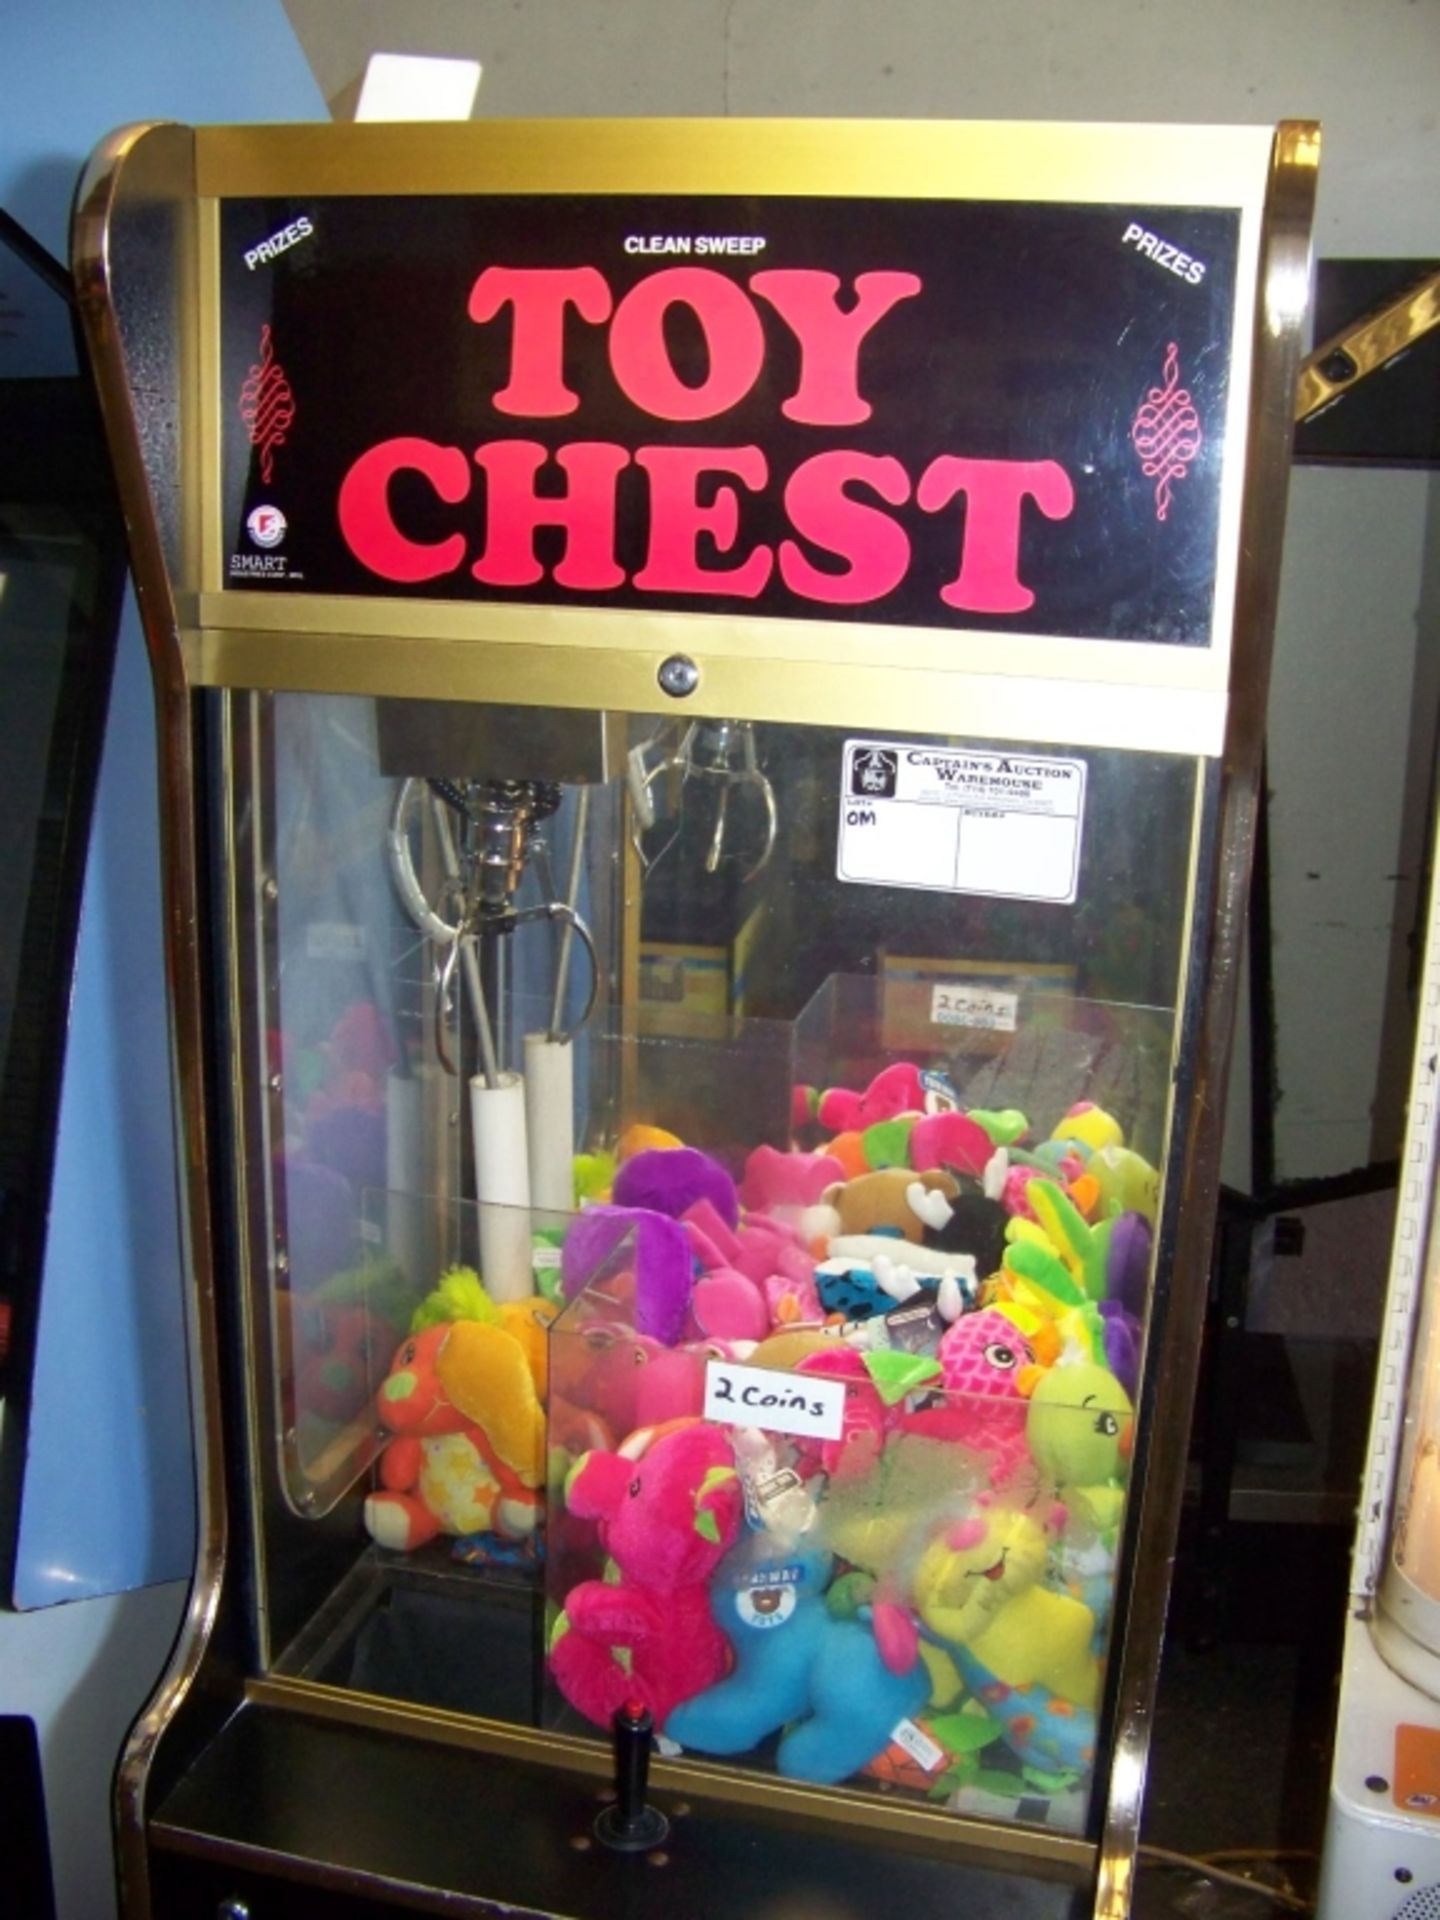 24"" TOY CHEST PLUSH CLAW CRANE MACHINE OM Item is in used condition. Evidence of wear and - Image 2 of 5